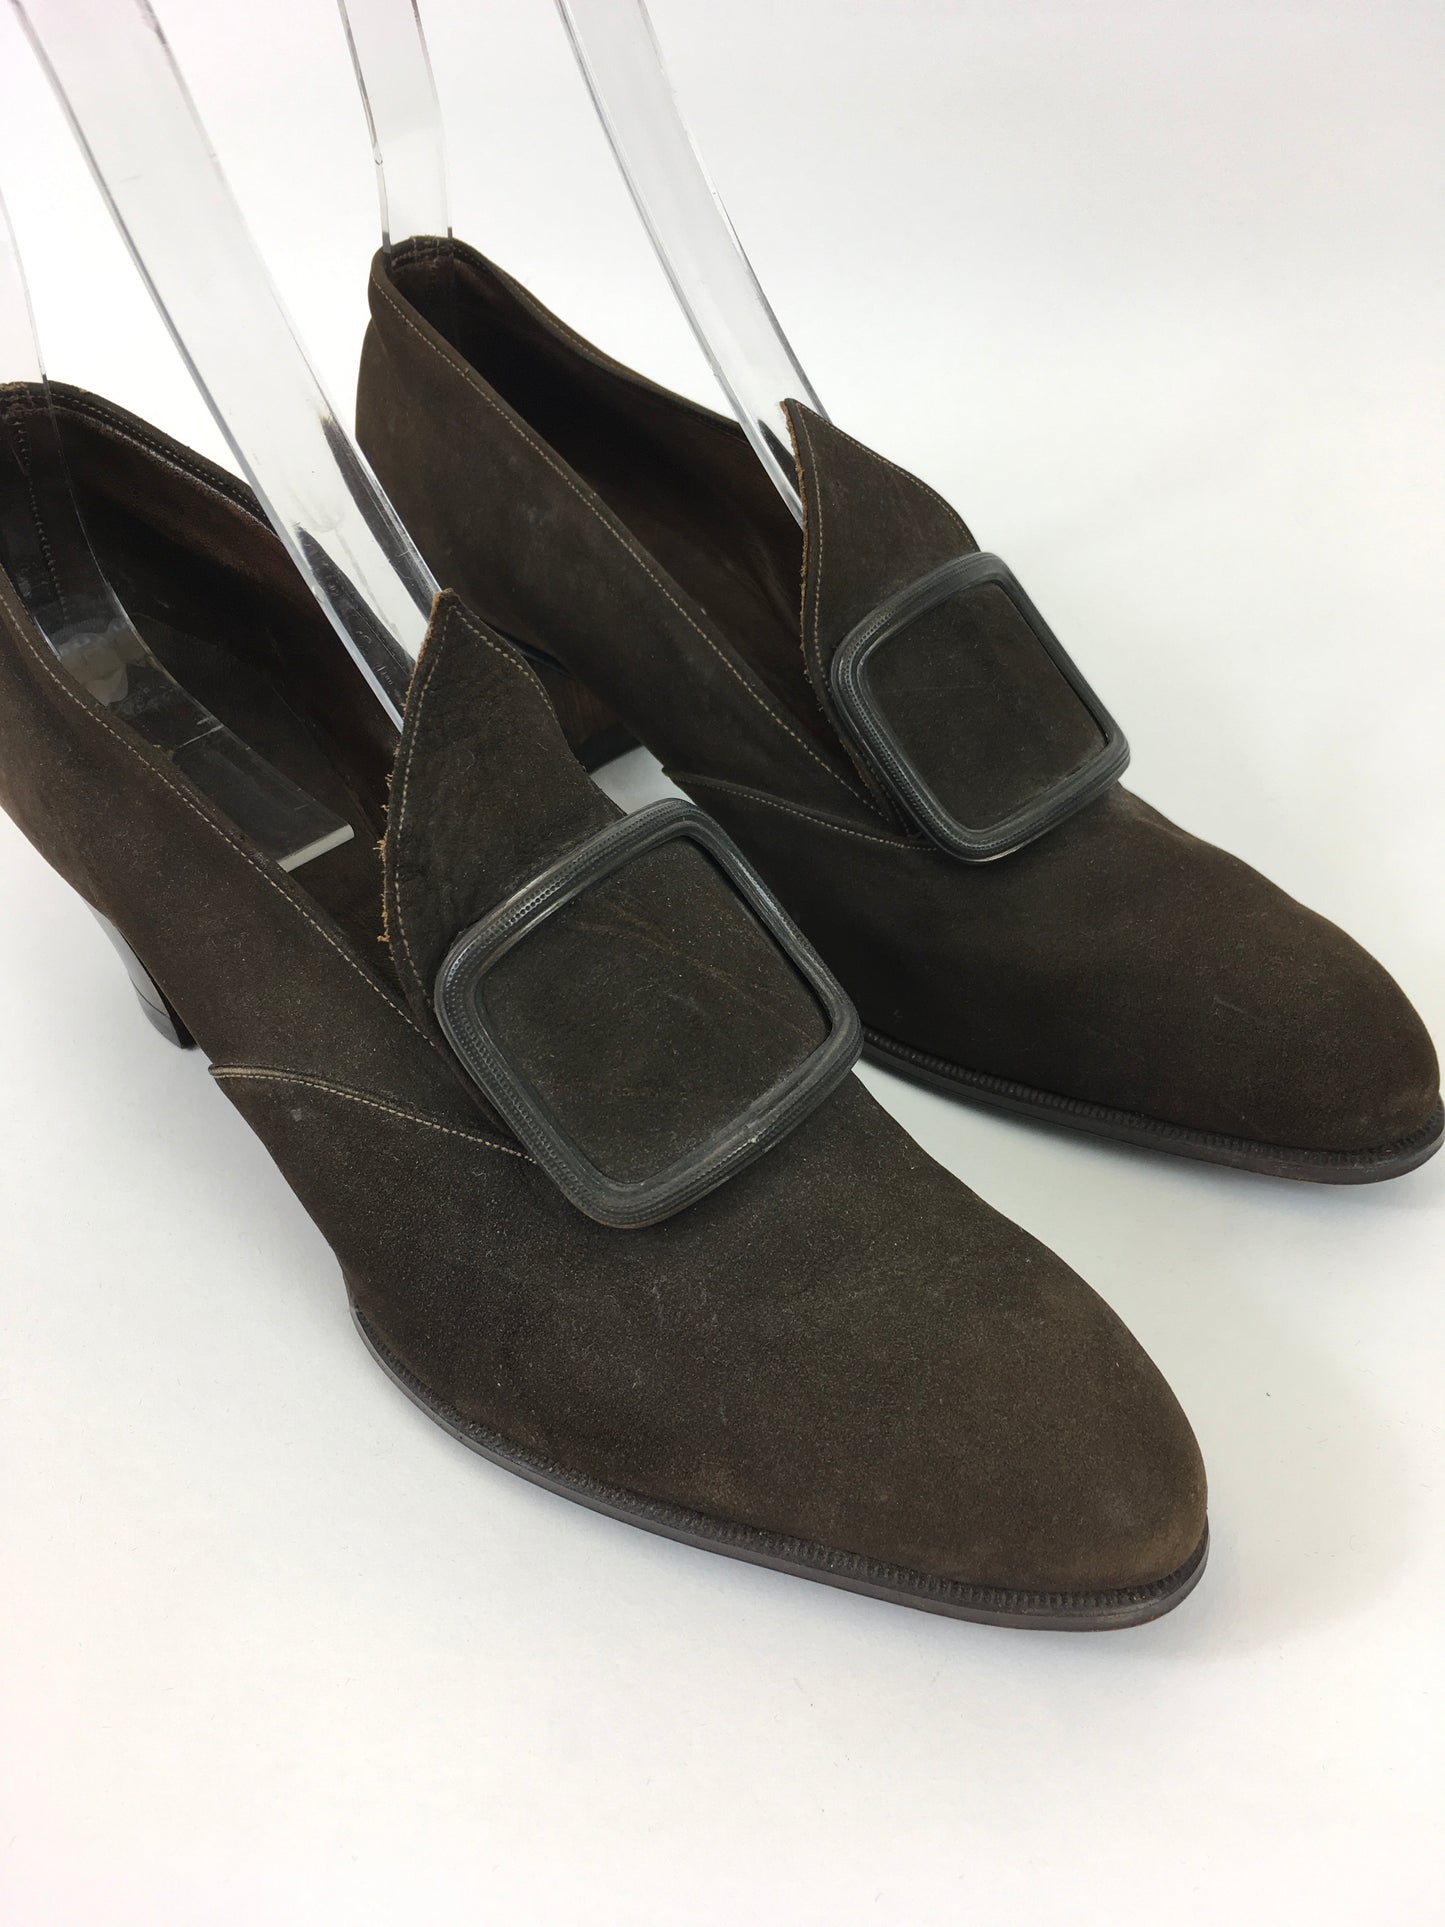 Original 1940’s Brown Suede Shoes - Made By ‘ Lotus ‘ A UK 5 / 5 1/2